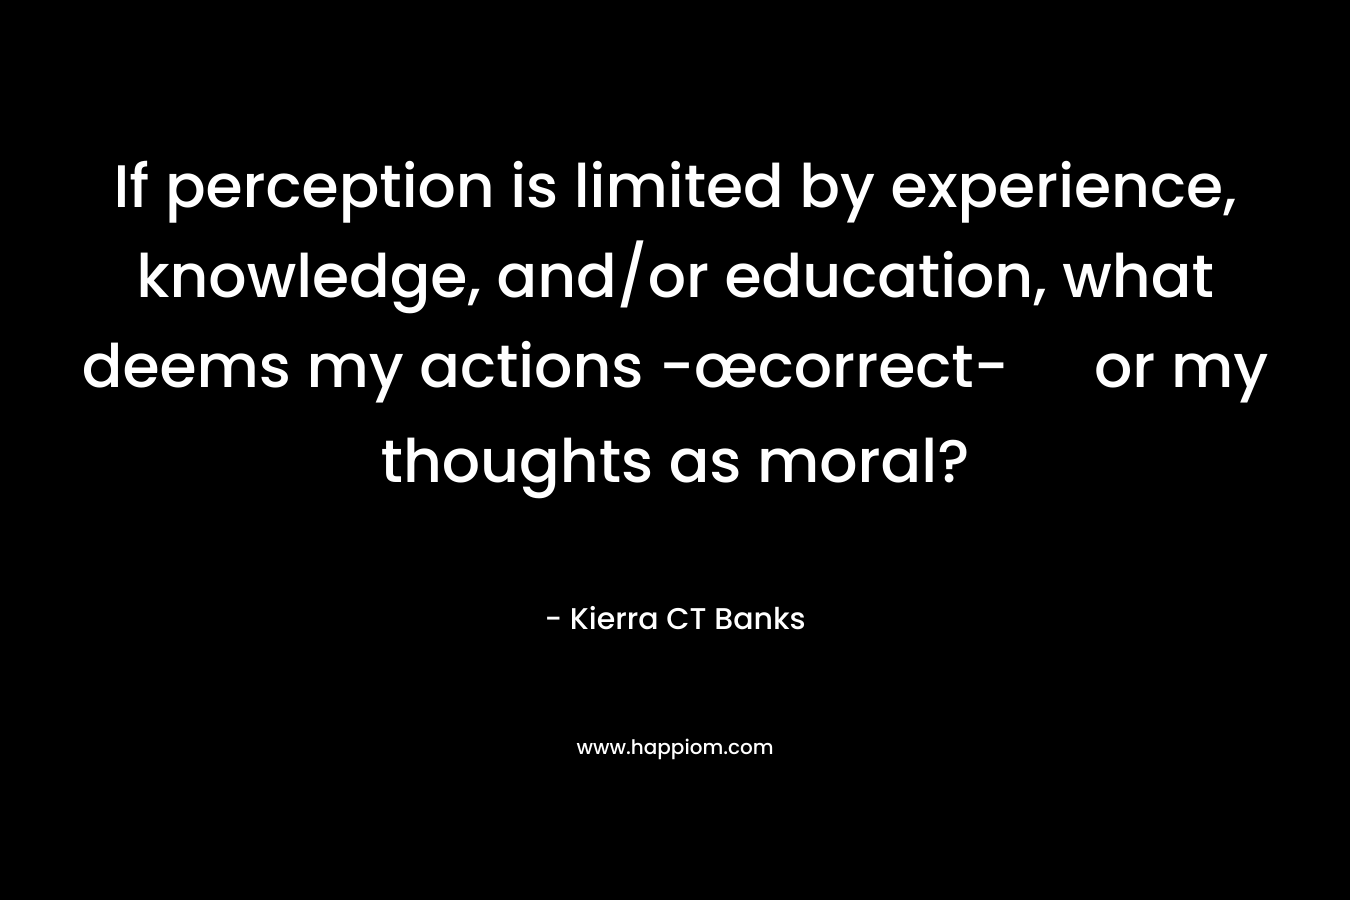 If perception is limited by experience, knowledge, and/or education, what deems my actions -œcorrect- or my thoughts as moral?